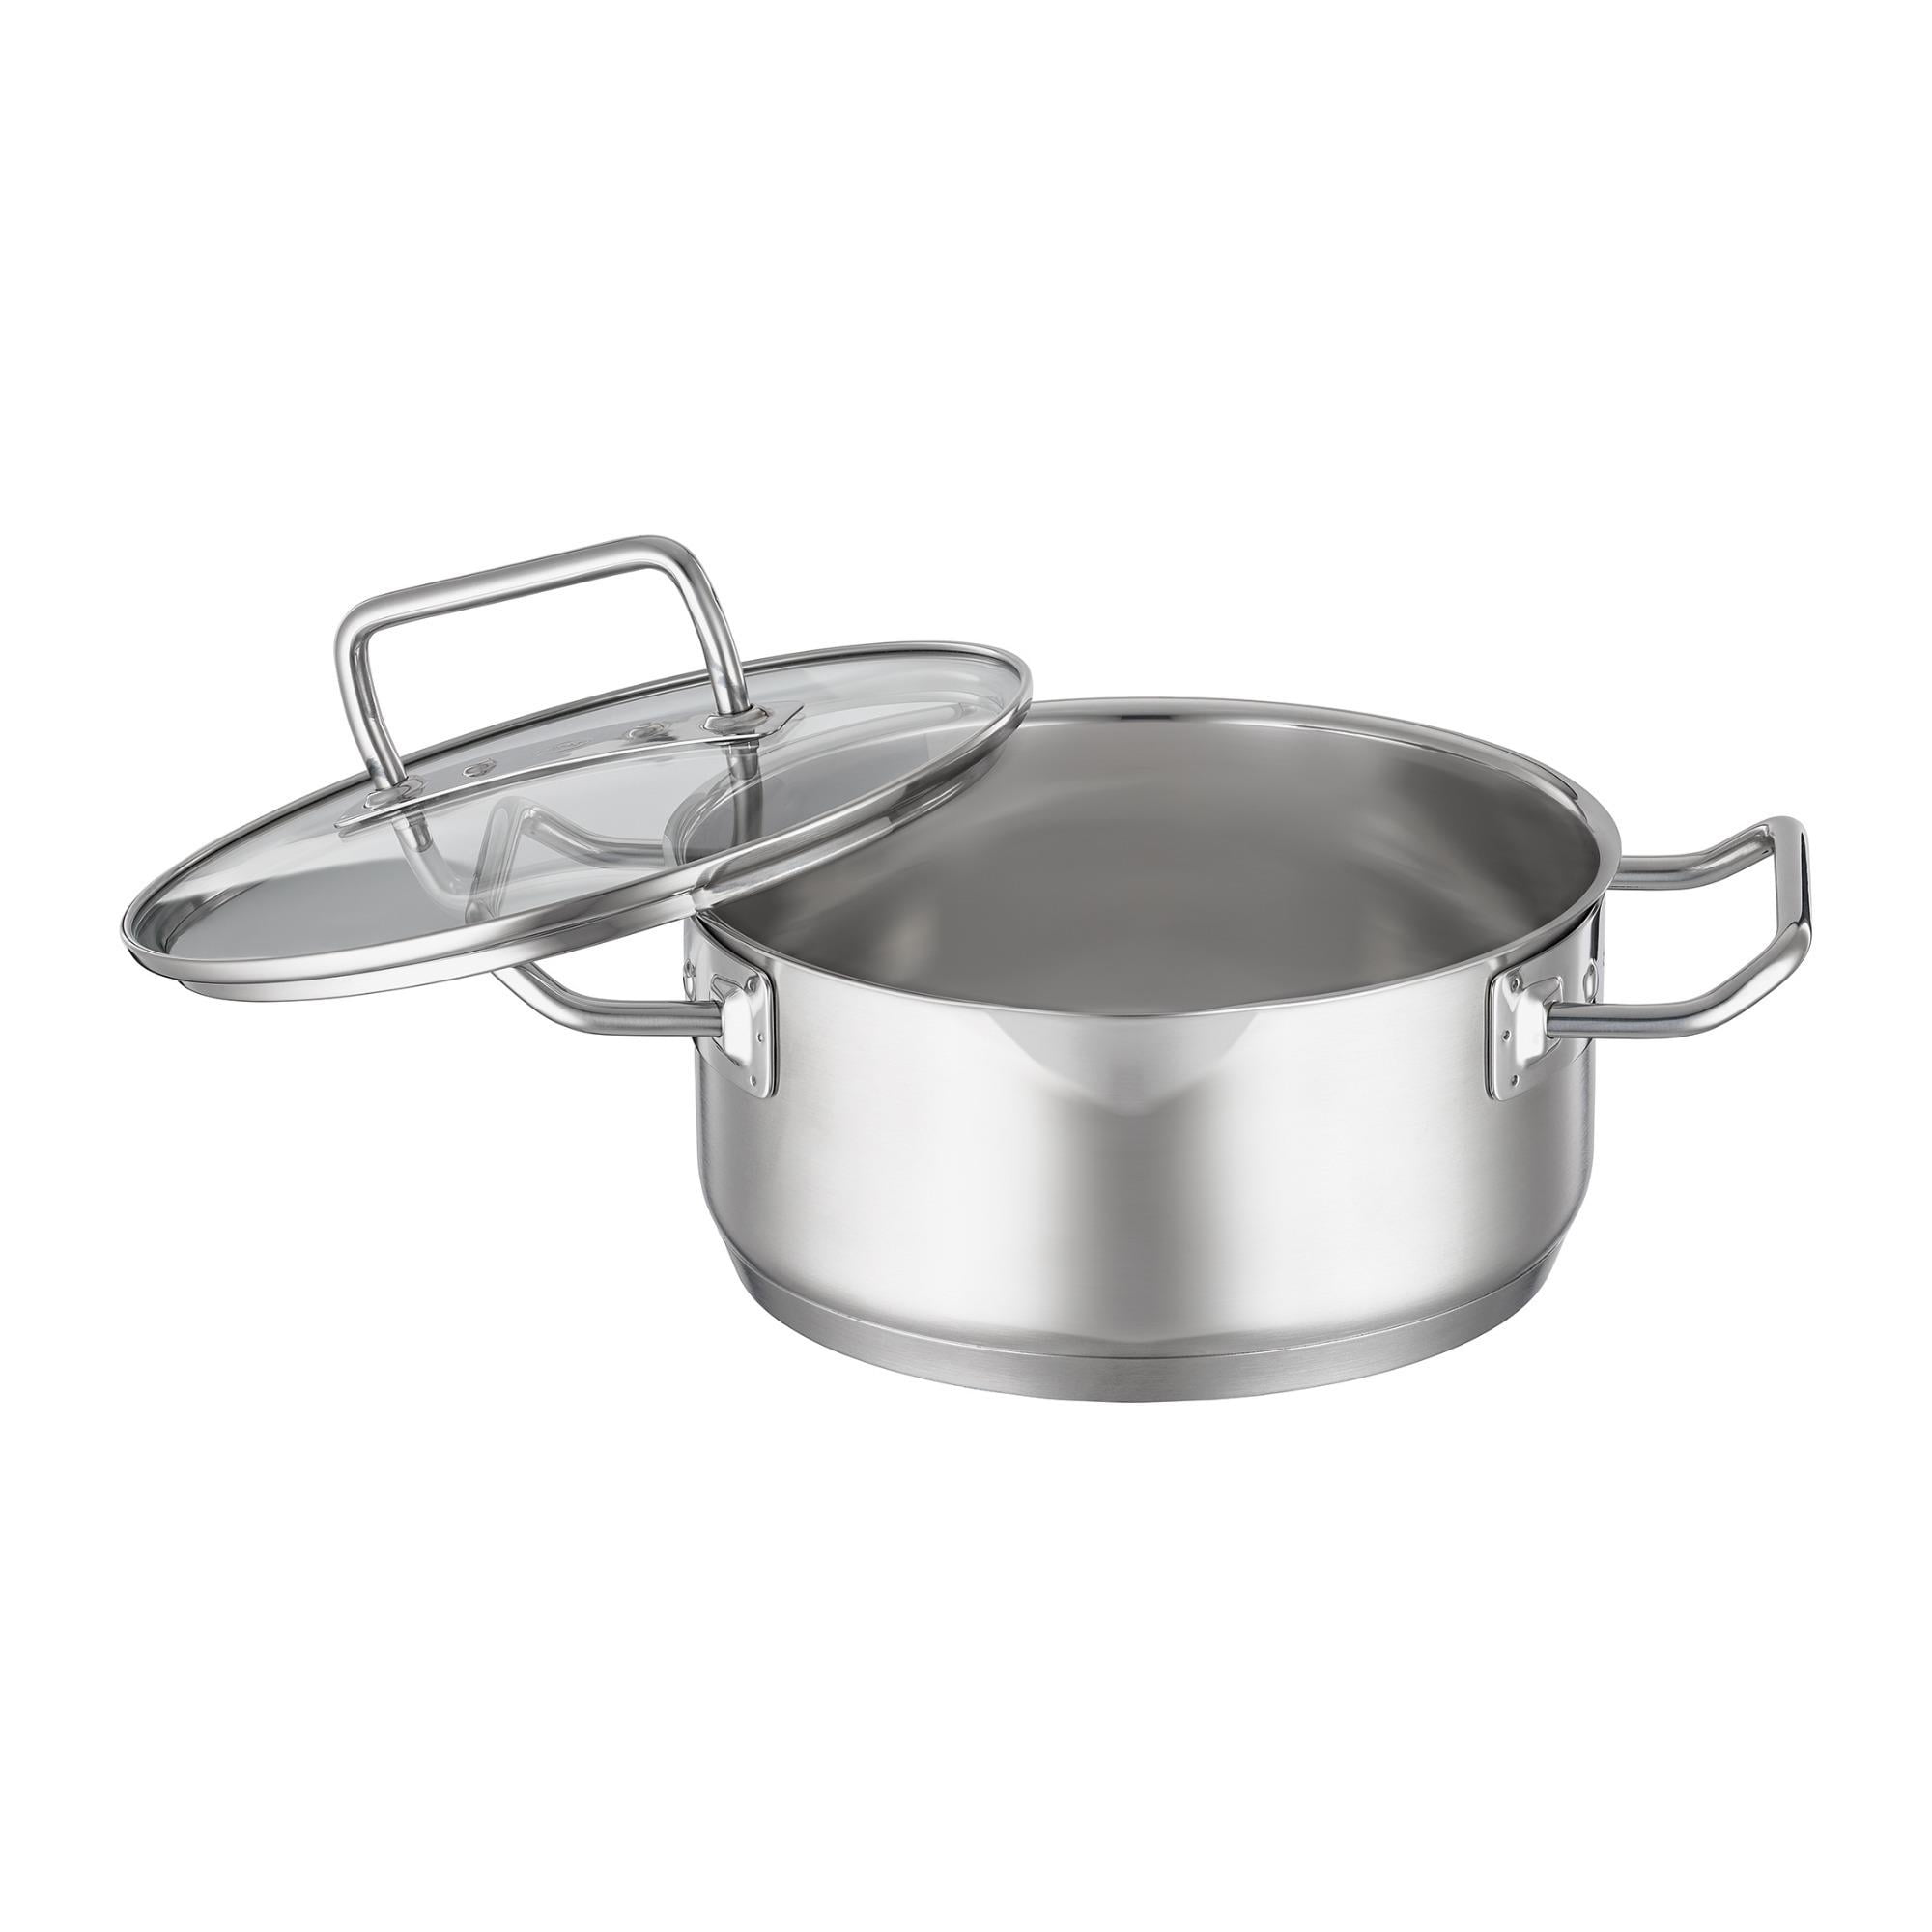 Rorence Stainless Steel Stock Pot Pasta Pots for Cooking with Lid - 3. –  Rorence Store